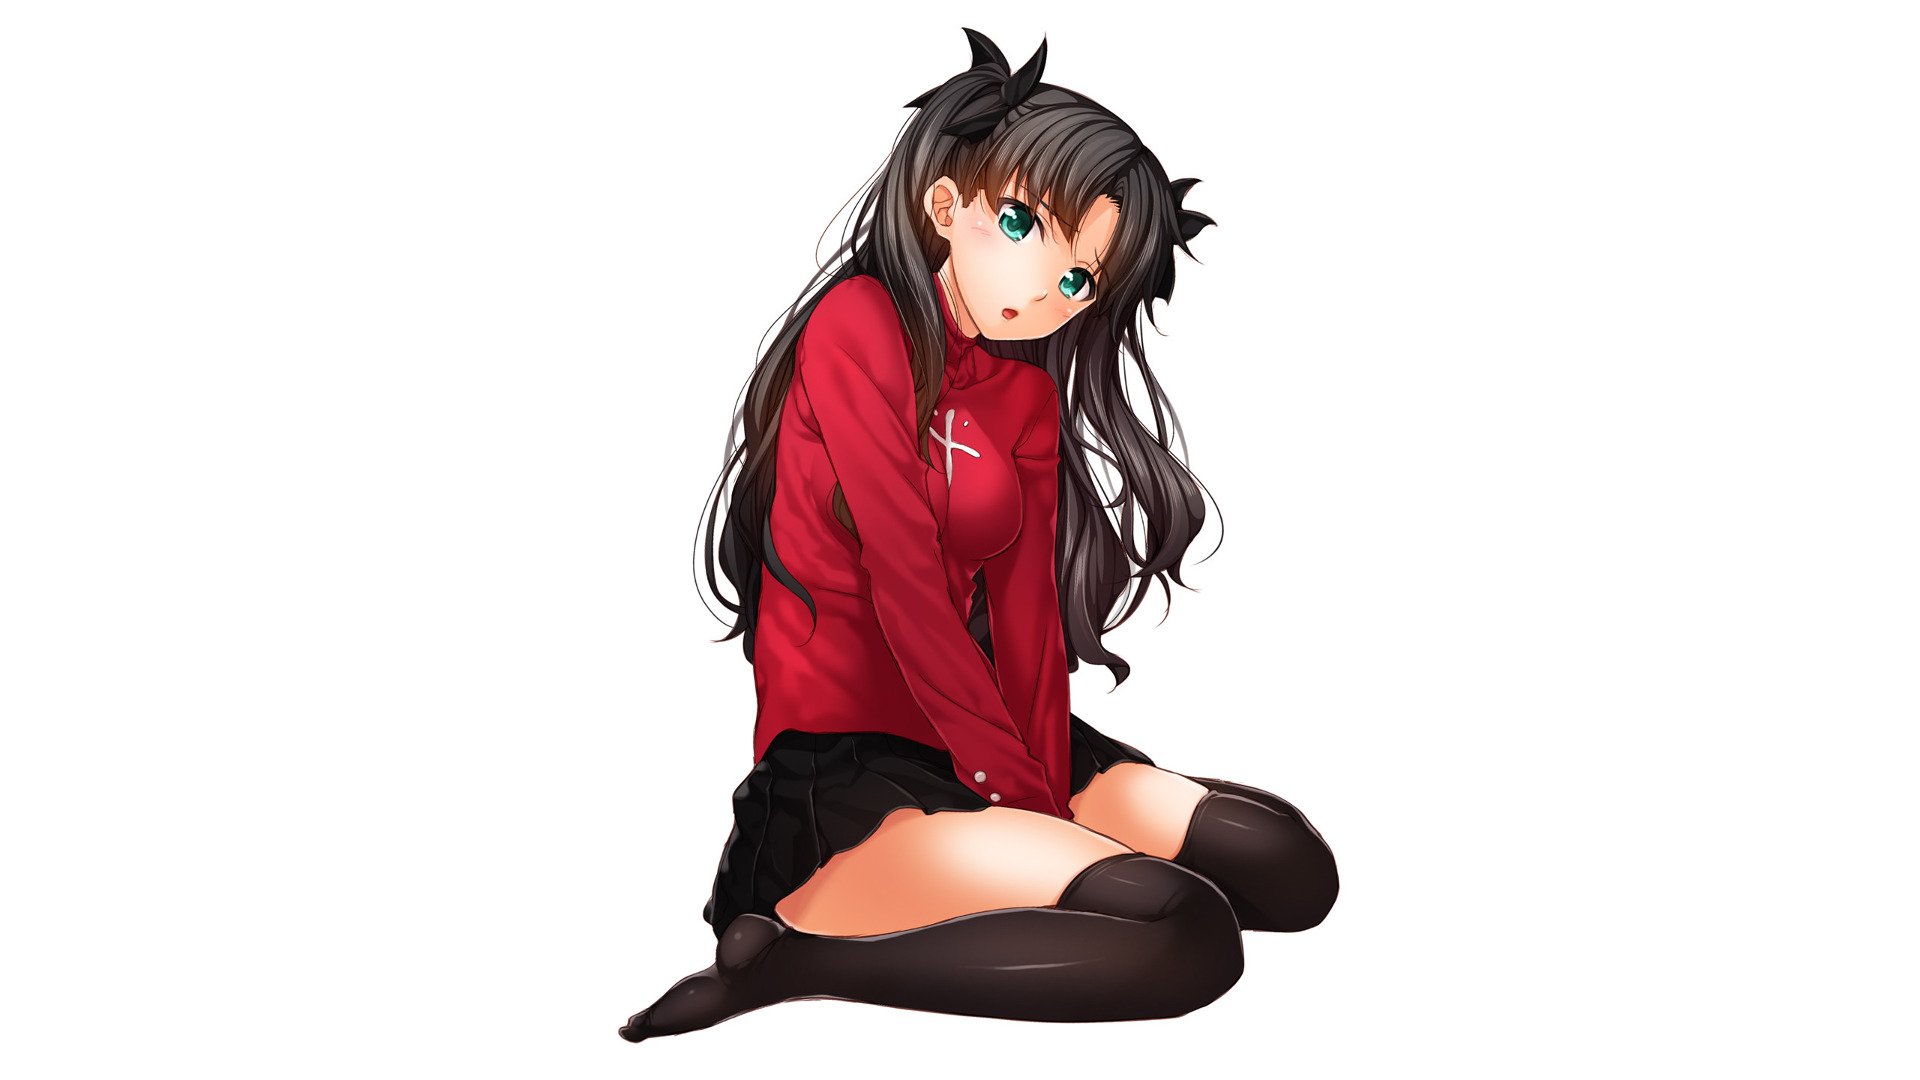 Tohsaka Rin Fate Series Fate Stay Night Anime Girls Anime Hd Wallpapers Desktop And Mobile